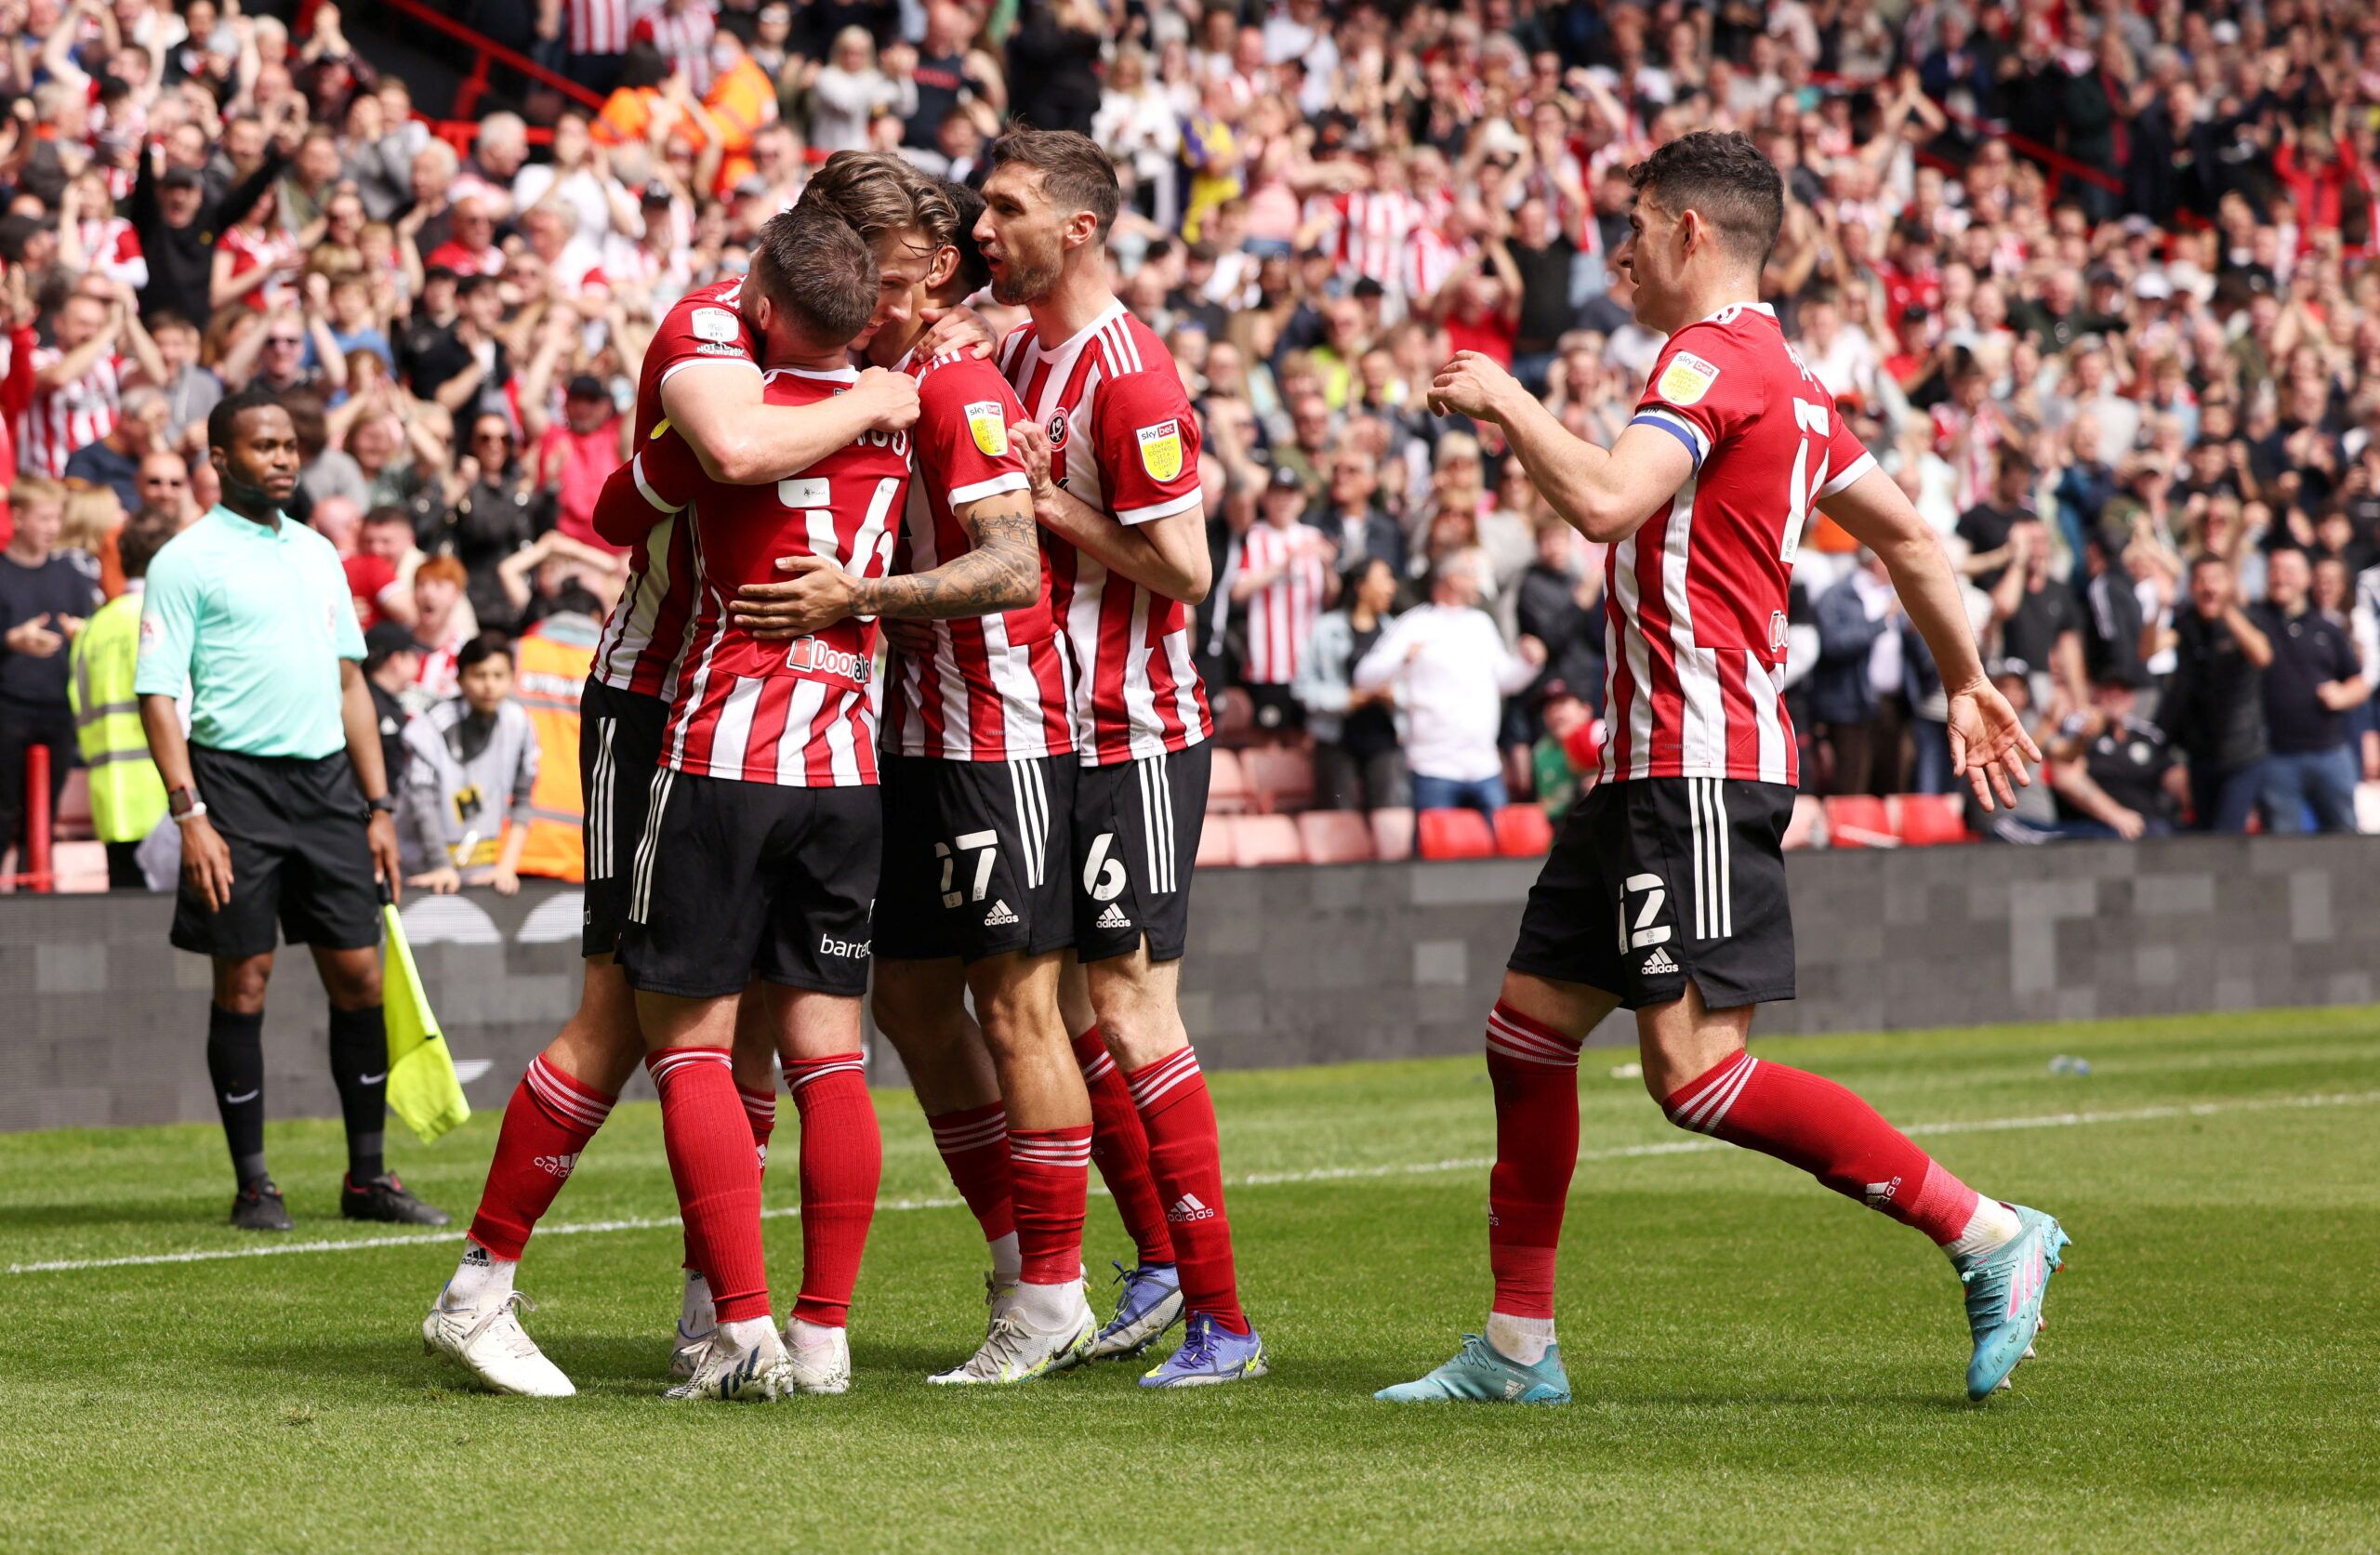 Soccer Football - Championship - Sheffield United v Fulham - Bramall Lane, Sheffield, Britain - May 7, 2022 Sheffield United's Sander Berge celebrates scoring their third goal with teammates        Action Images/John Clifton  EDITORIAL USE ONLY. No use with unauthorized audio, video, data, fixture lists, club/league logos or 